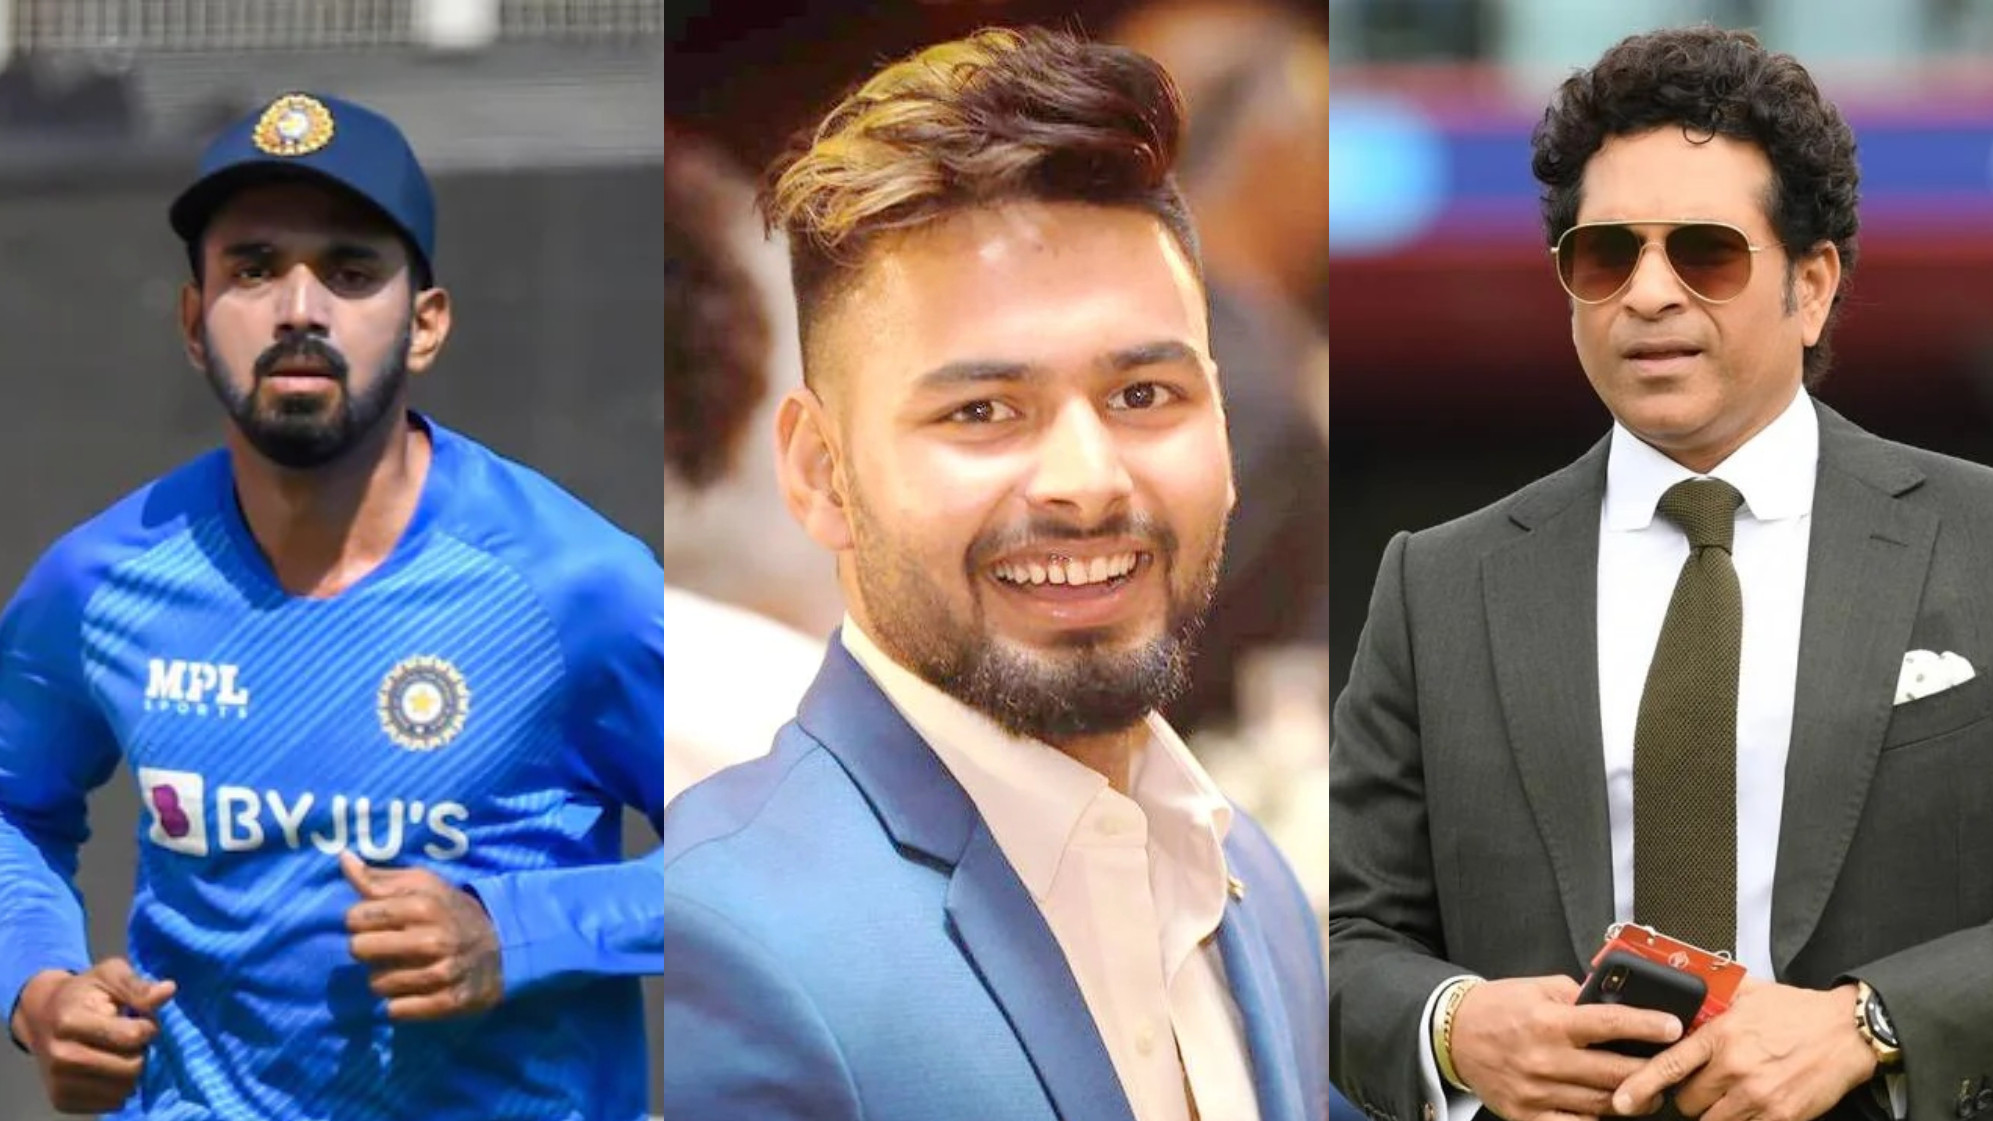 Team India and Indian cricket fraternity send prayers to Rishabh Pant after his horrific car accident